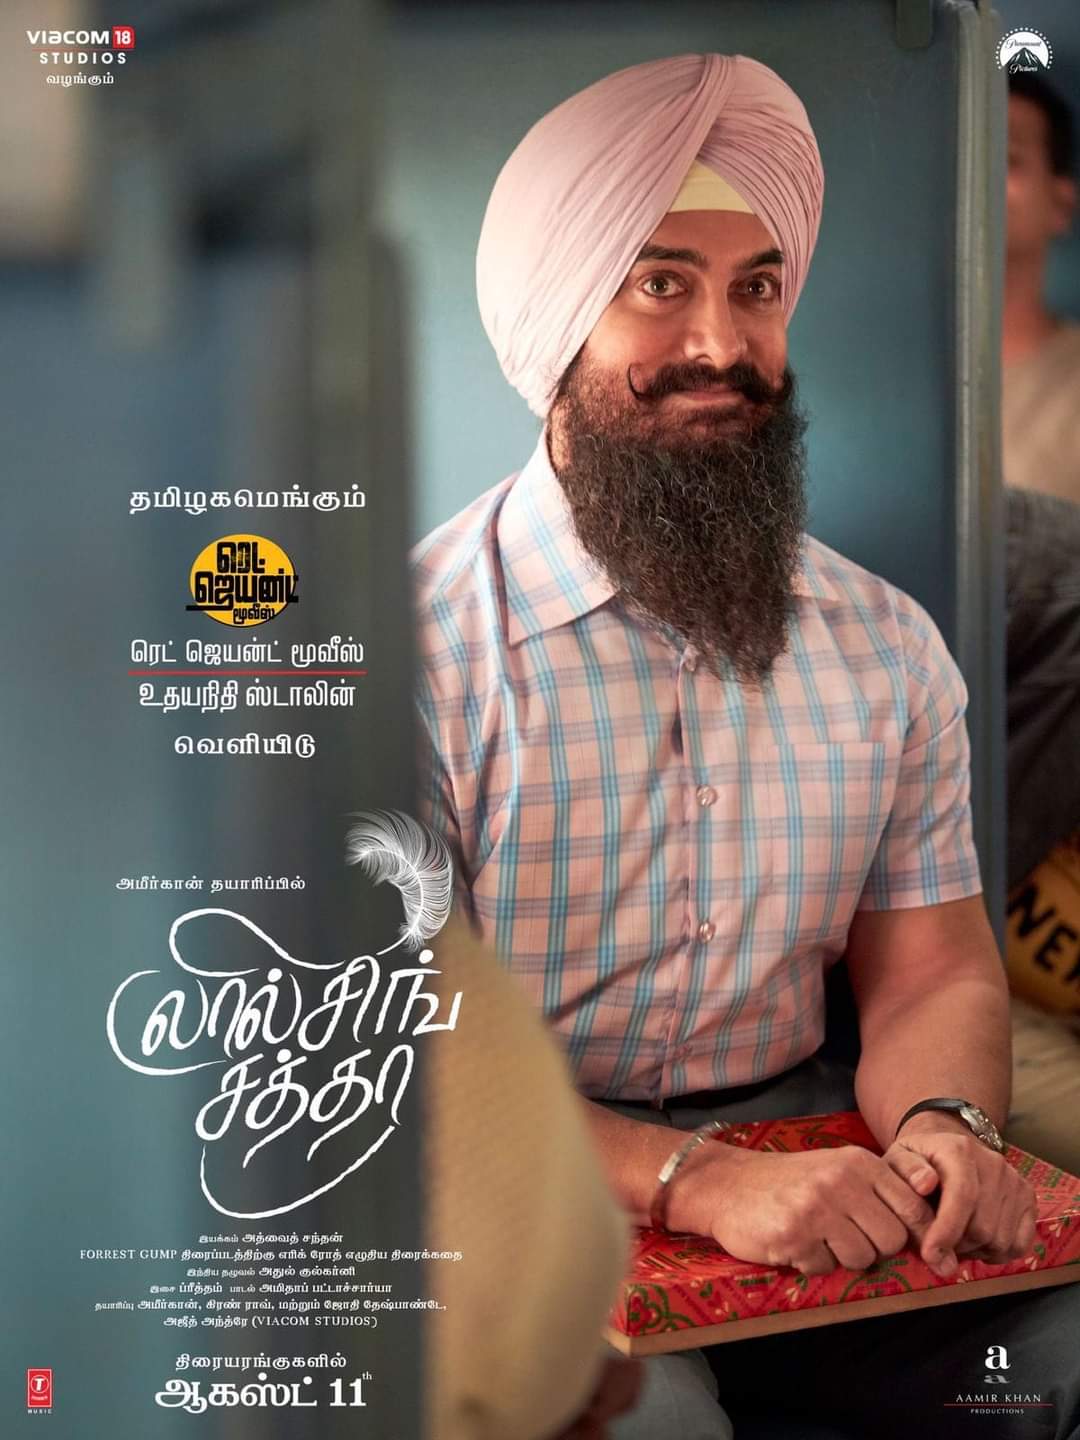 Forrest Gump Laal Singh Chaddha Movie Tamil Trailer Released